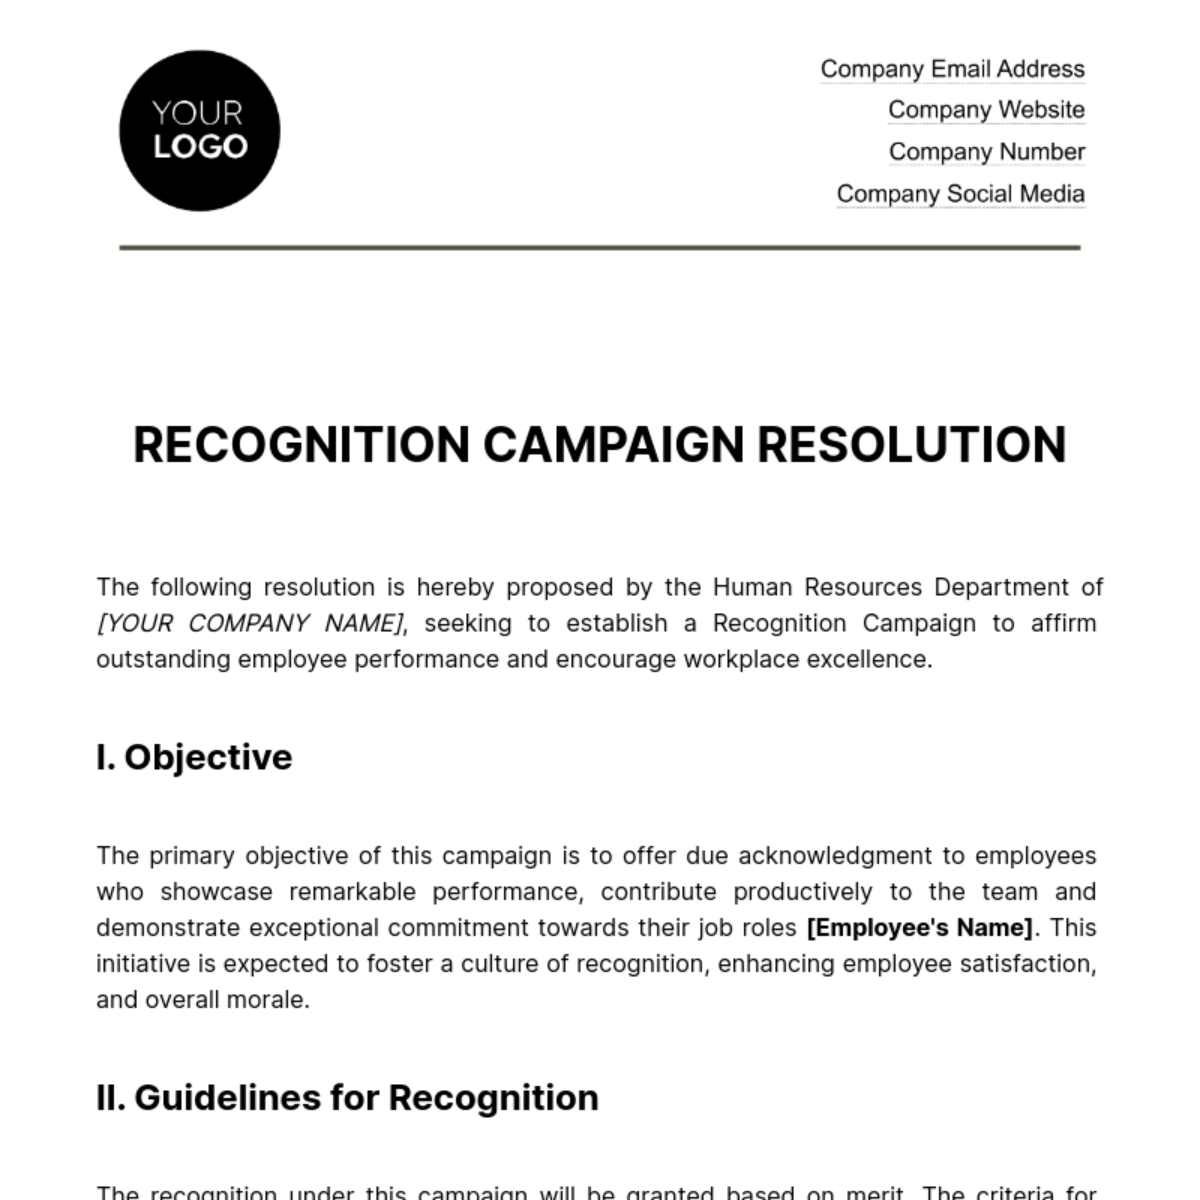 Free Recognition Campaign Resolution HR Template